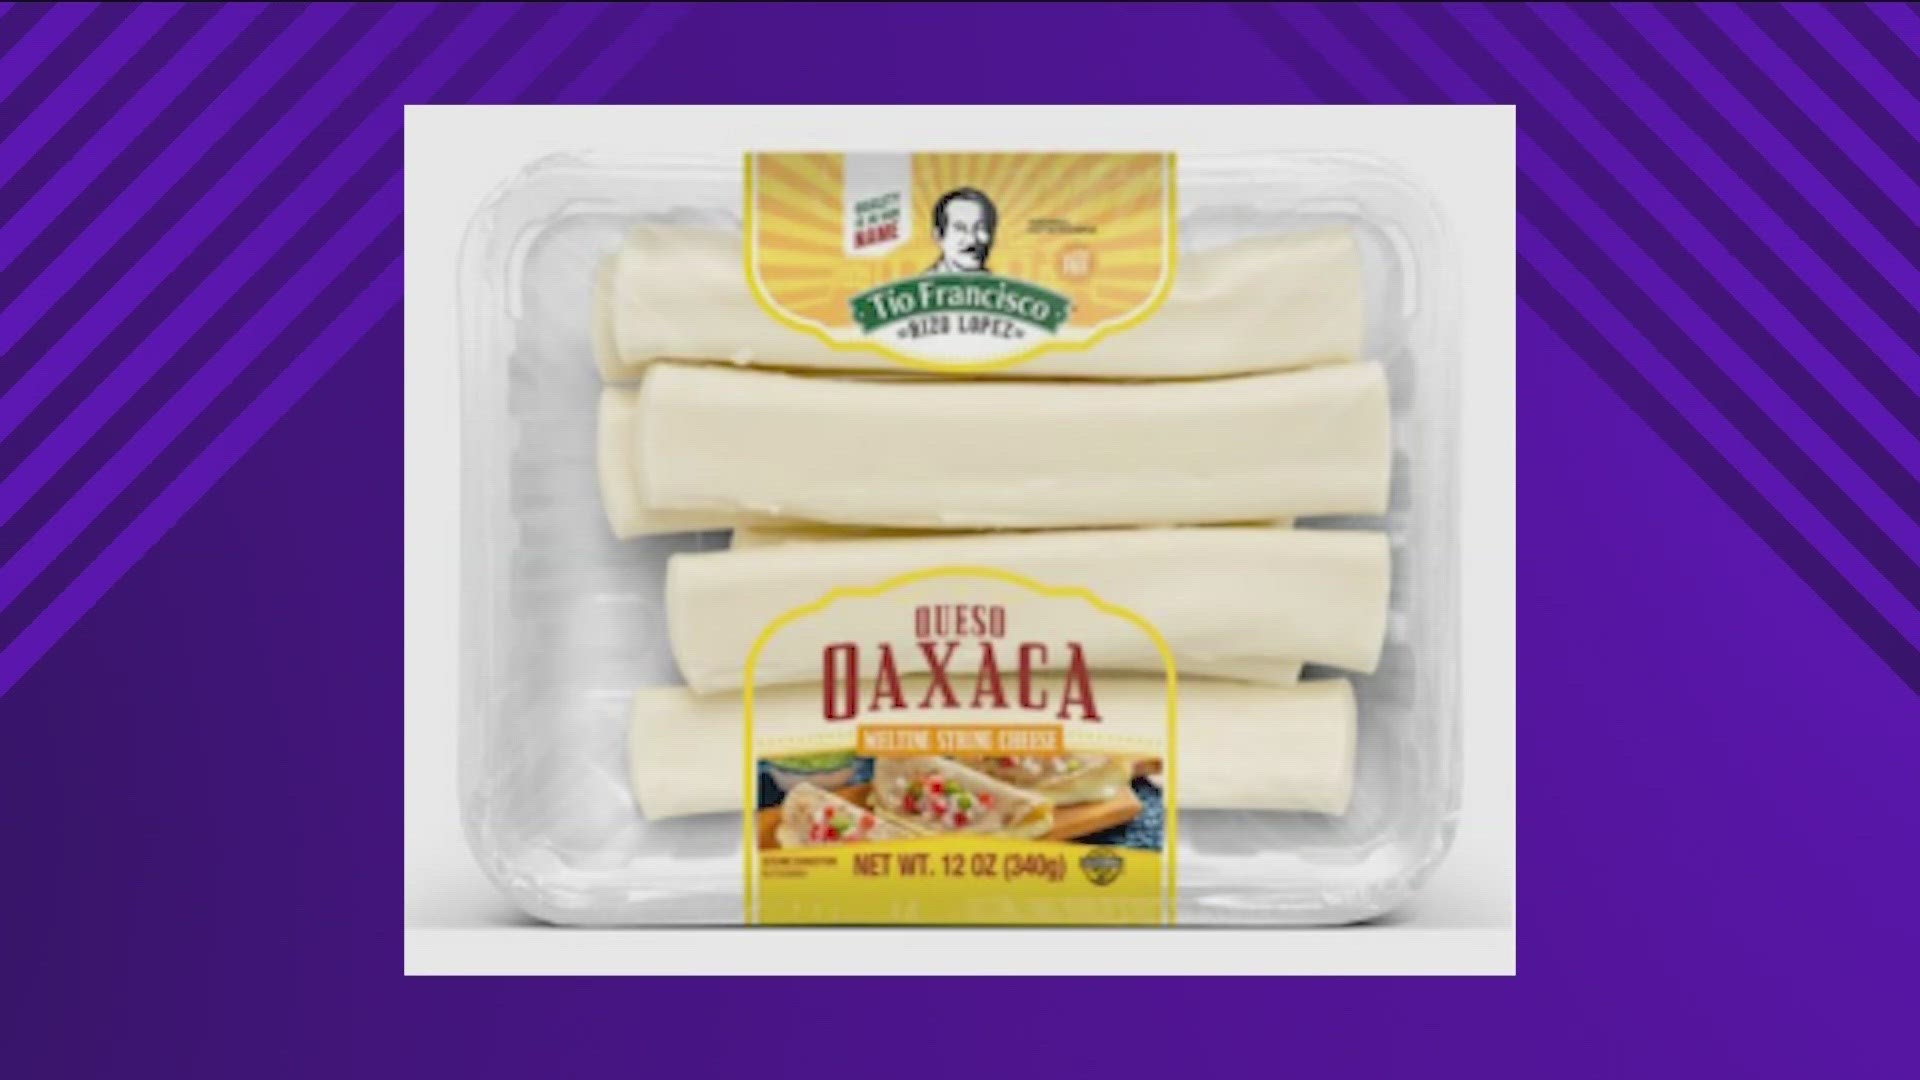 A listeria outbreak linked to cheese has killed two people, including one in Texas. It has sent 20 others to the hospital.